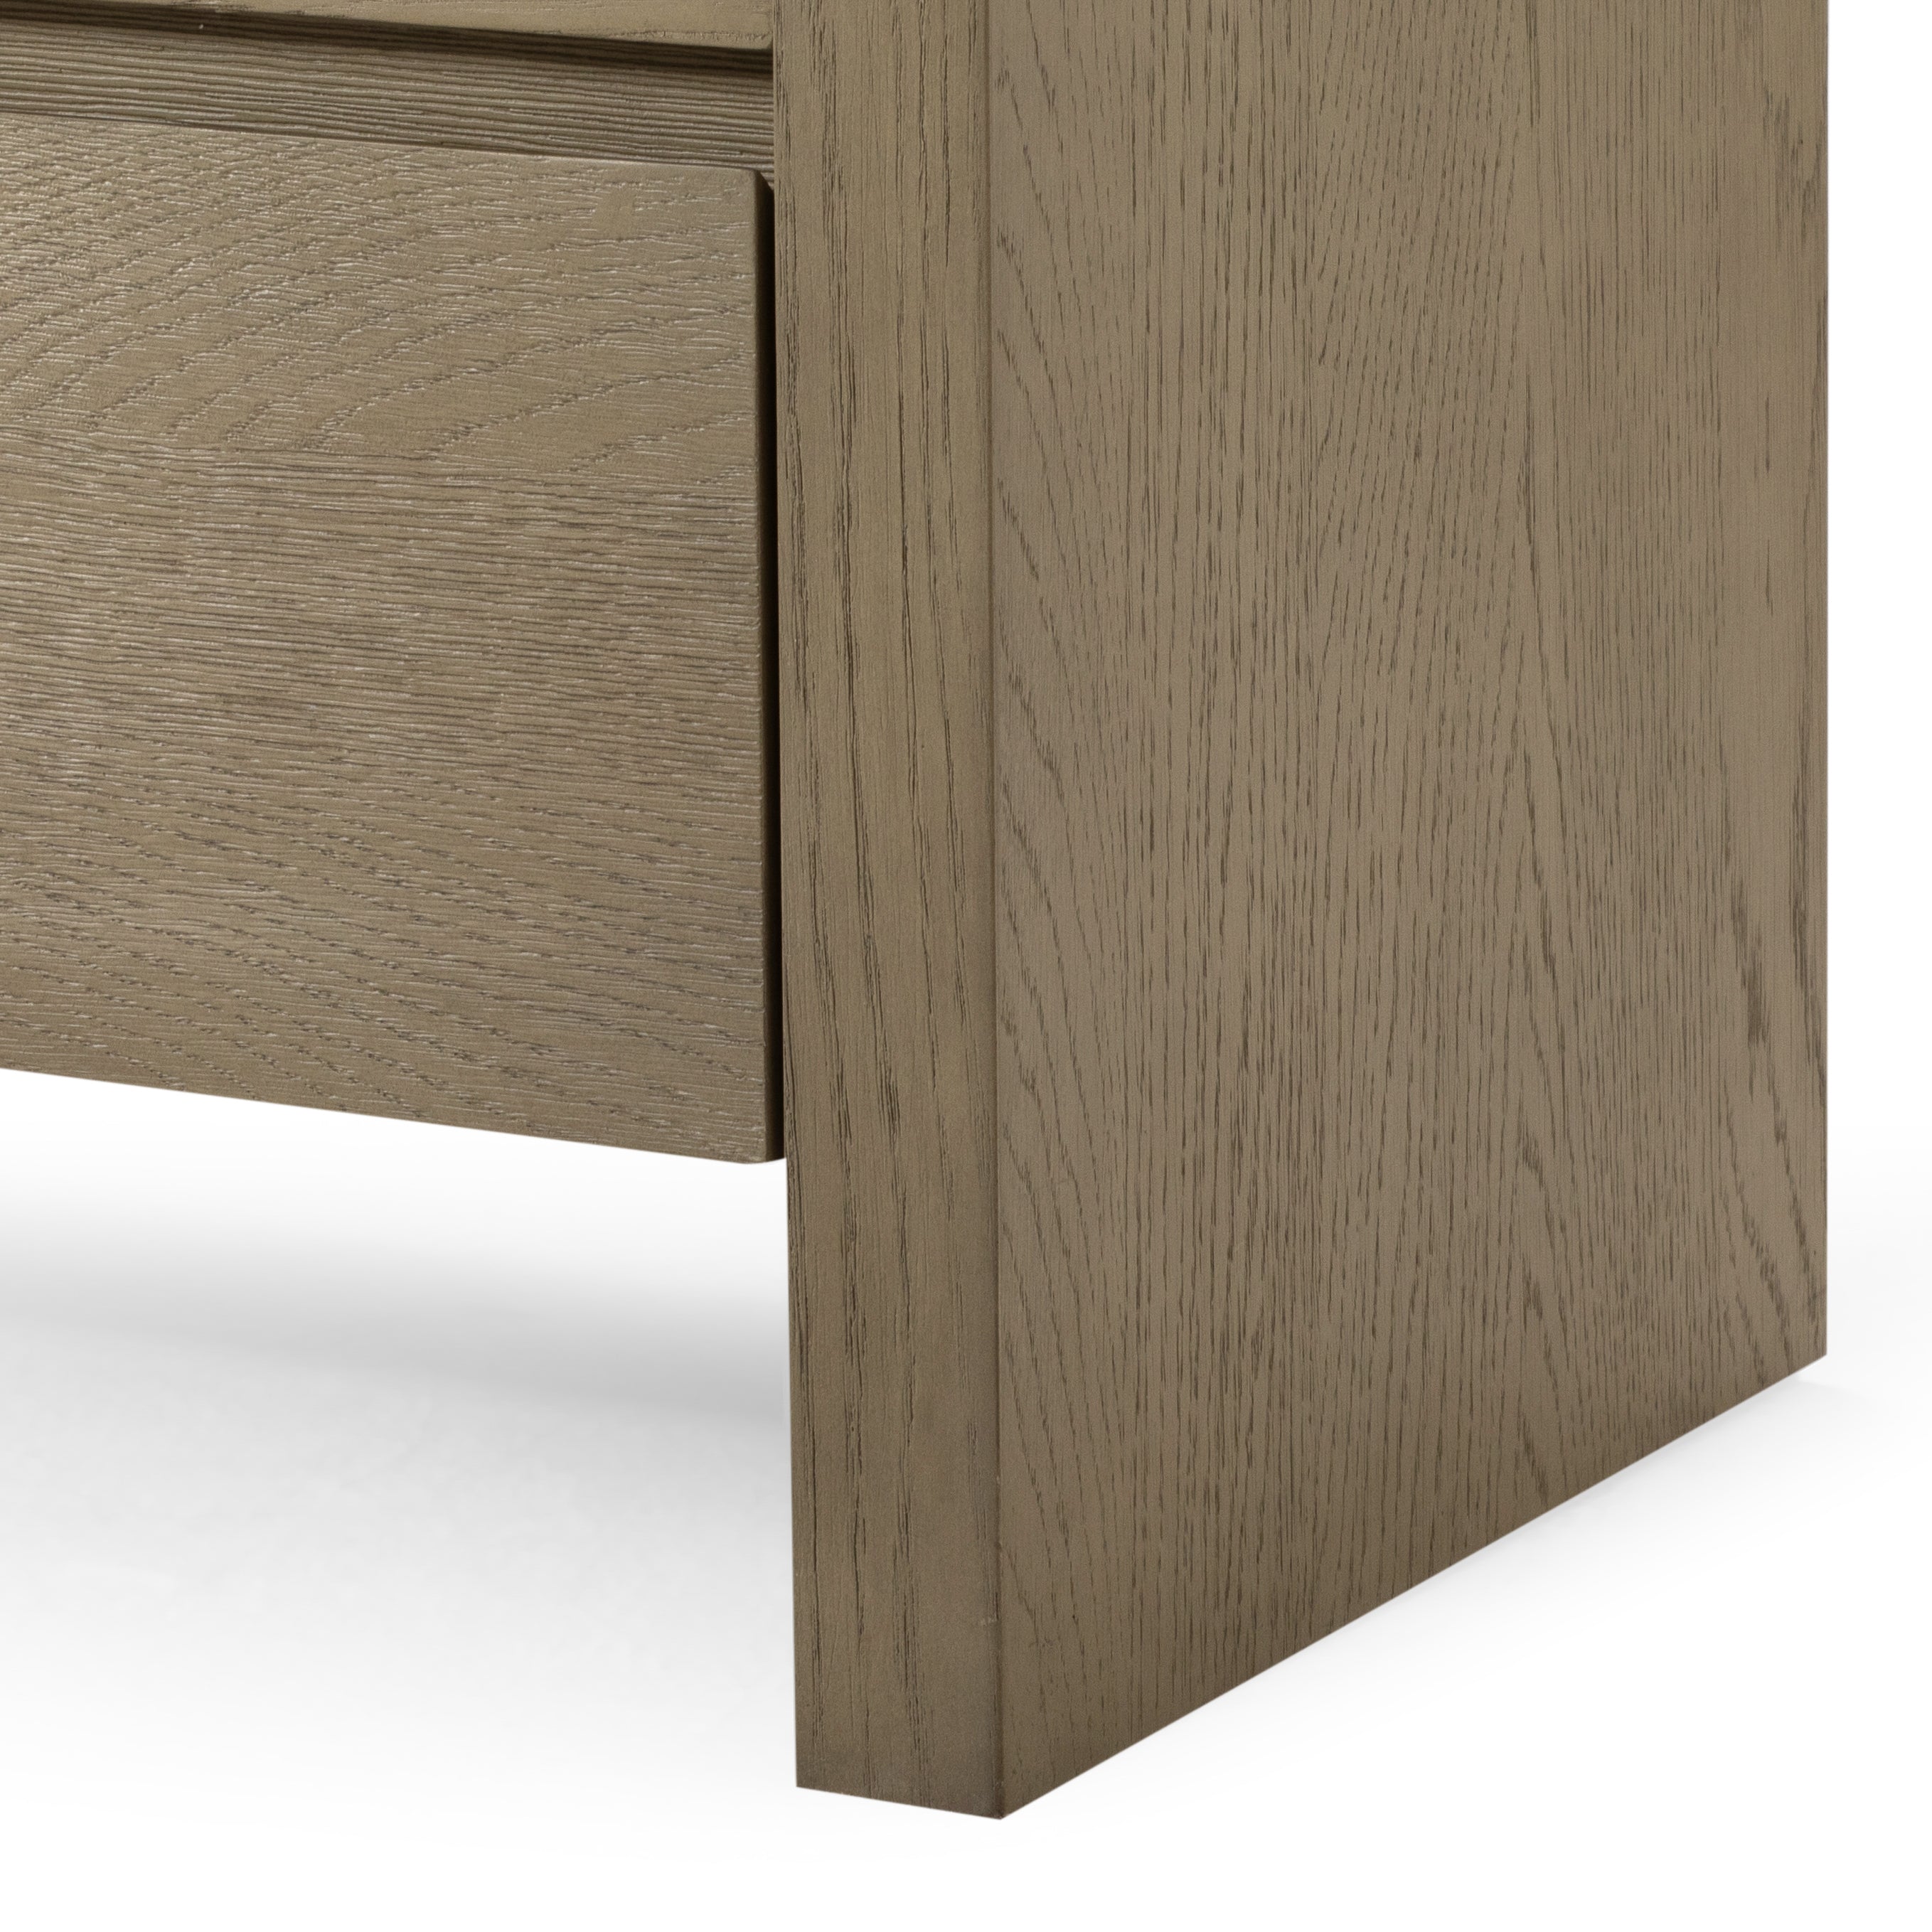 Ada Contemporary Wooden Media Unit in Refined Grey Finish in Media Units by Maven Lane